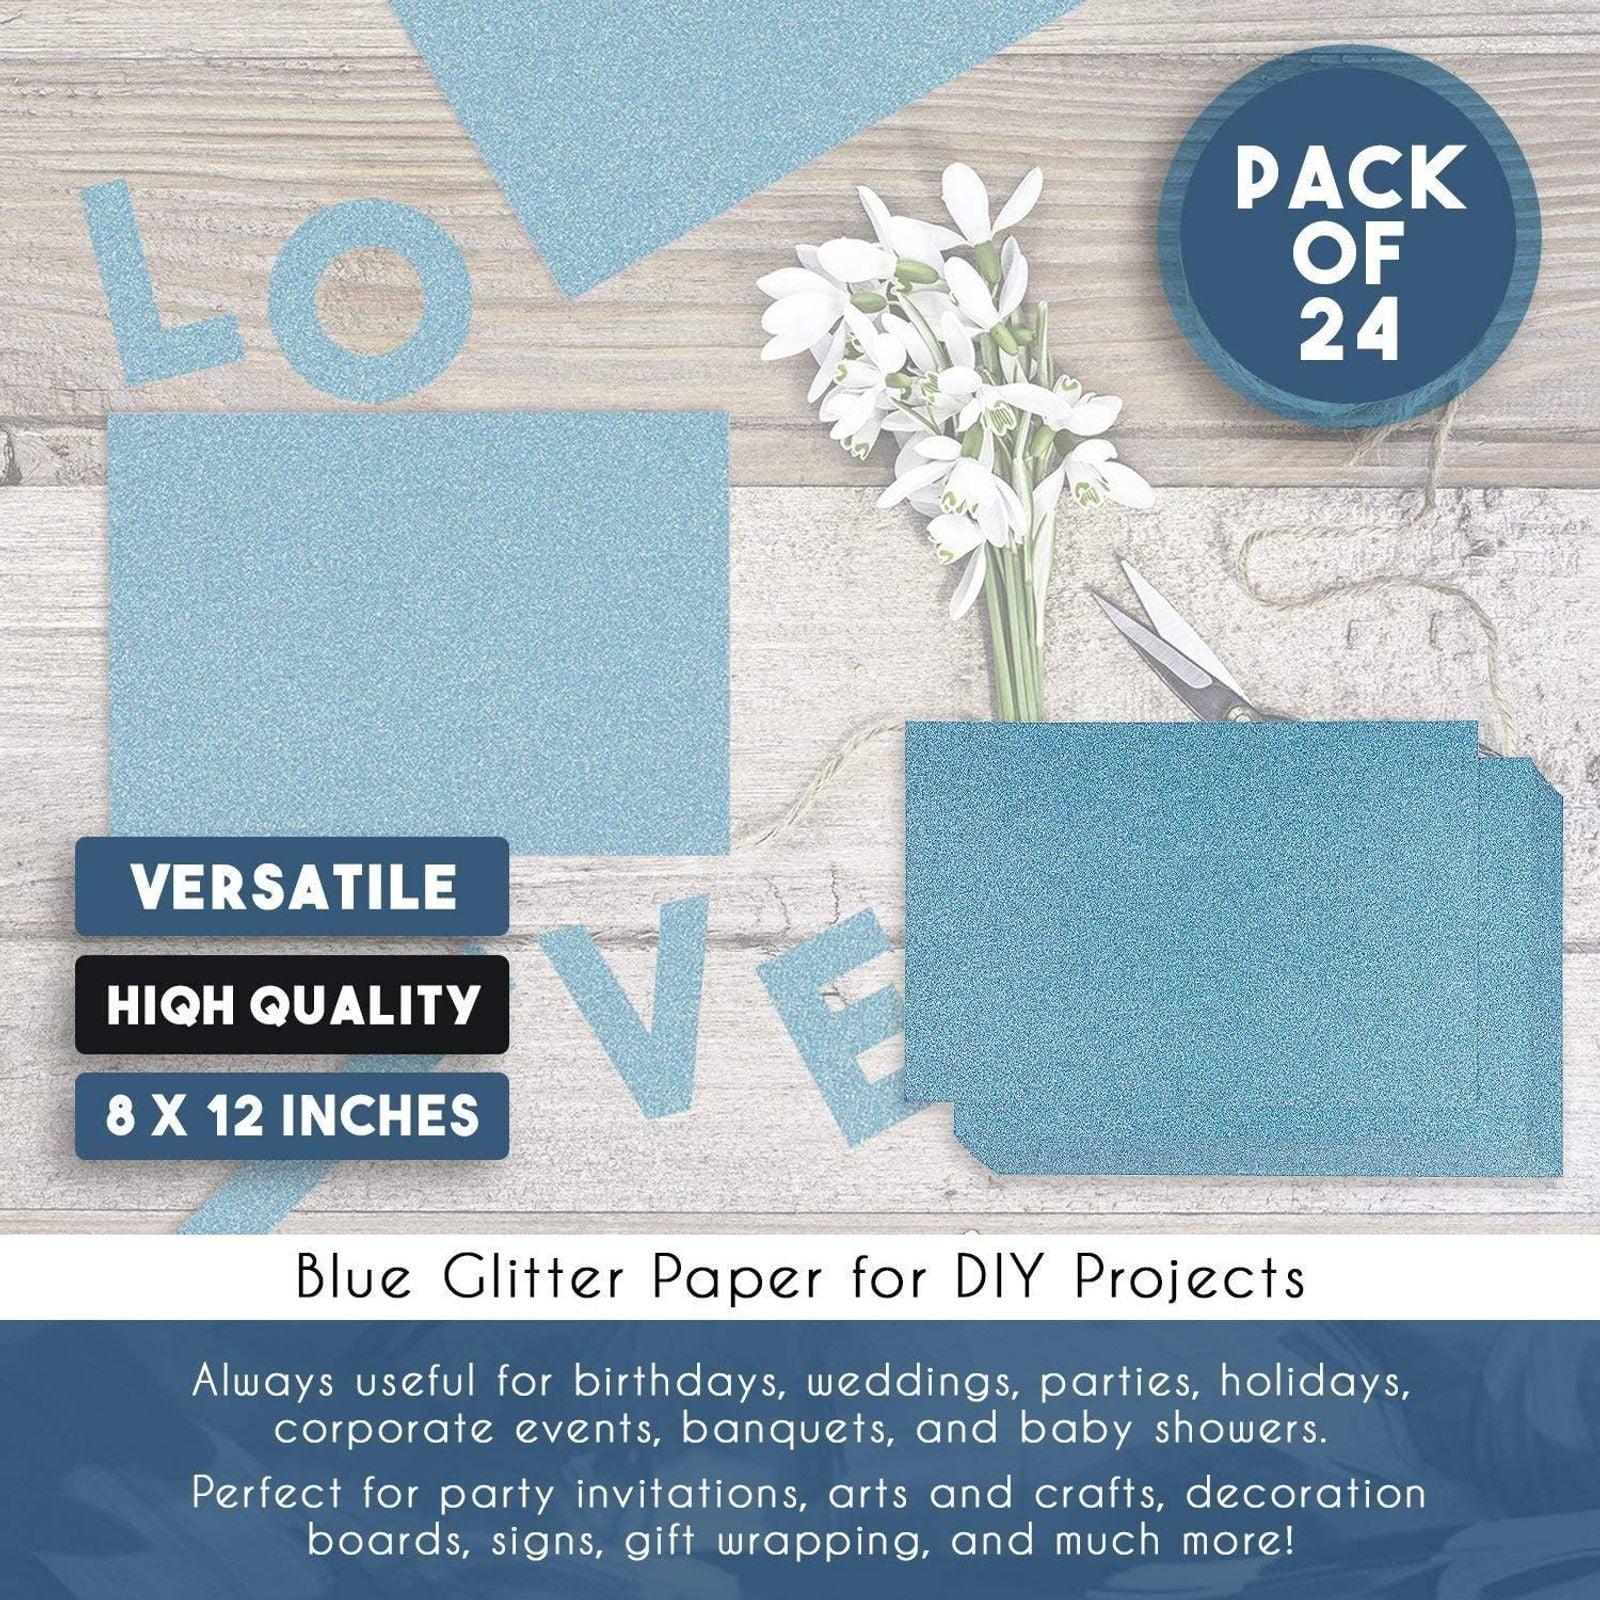 Bright Creations 30 Sheets Double-Sided Light Blue Glitter Cardstock Paper for DIY Crafts, Card Making, Invitations, 300gsm, 8.5 x 11 in